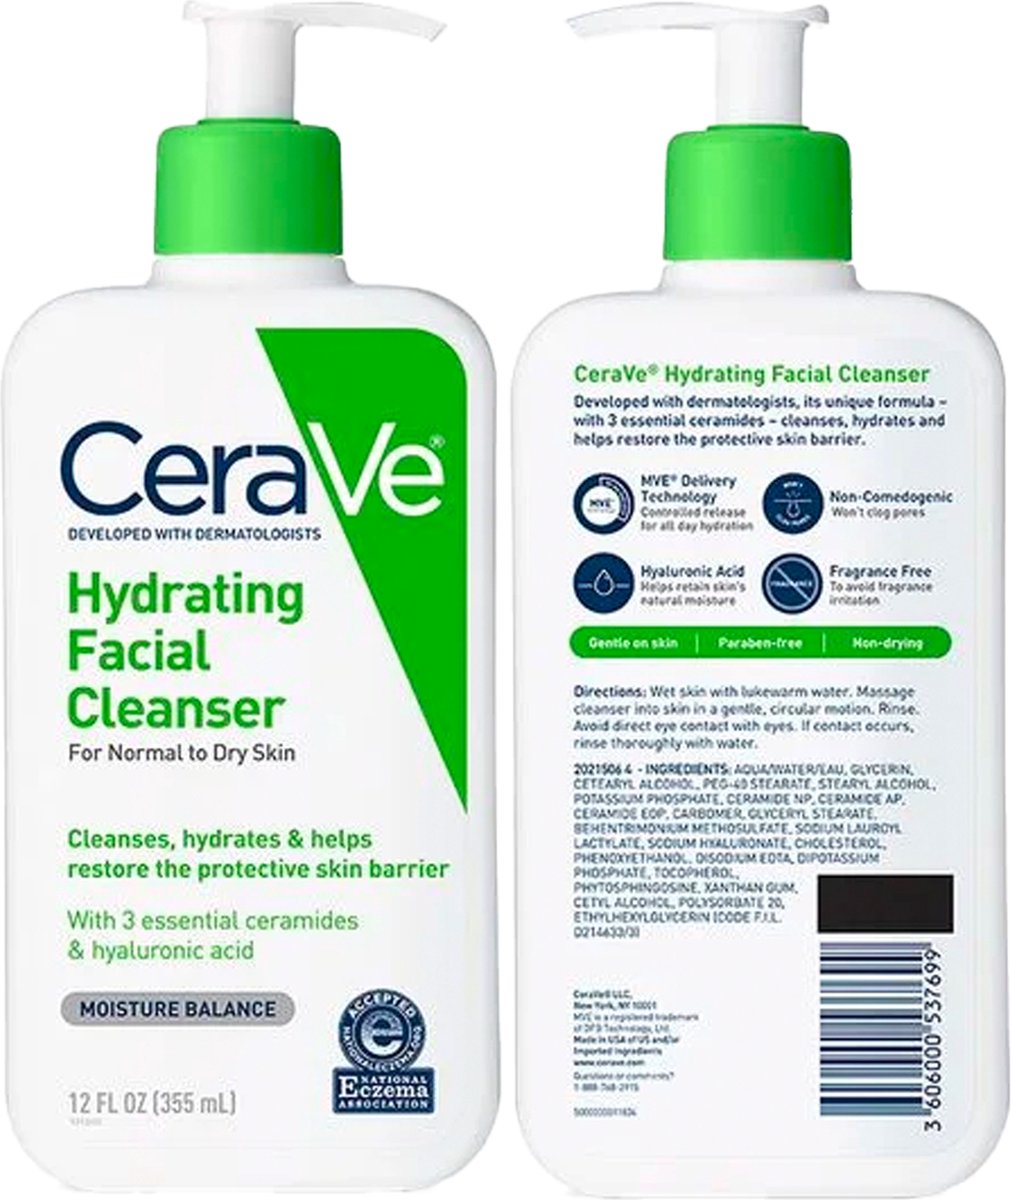 CeraVe Hydrating Facial Cleanser for Normal to Dry Skin - Reinigingsmelk - Gezicht - Lichaam 355ml